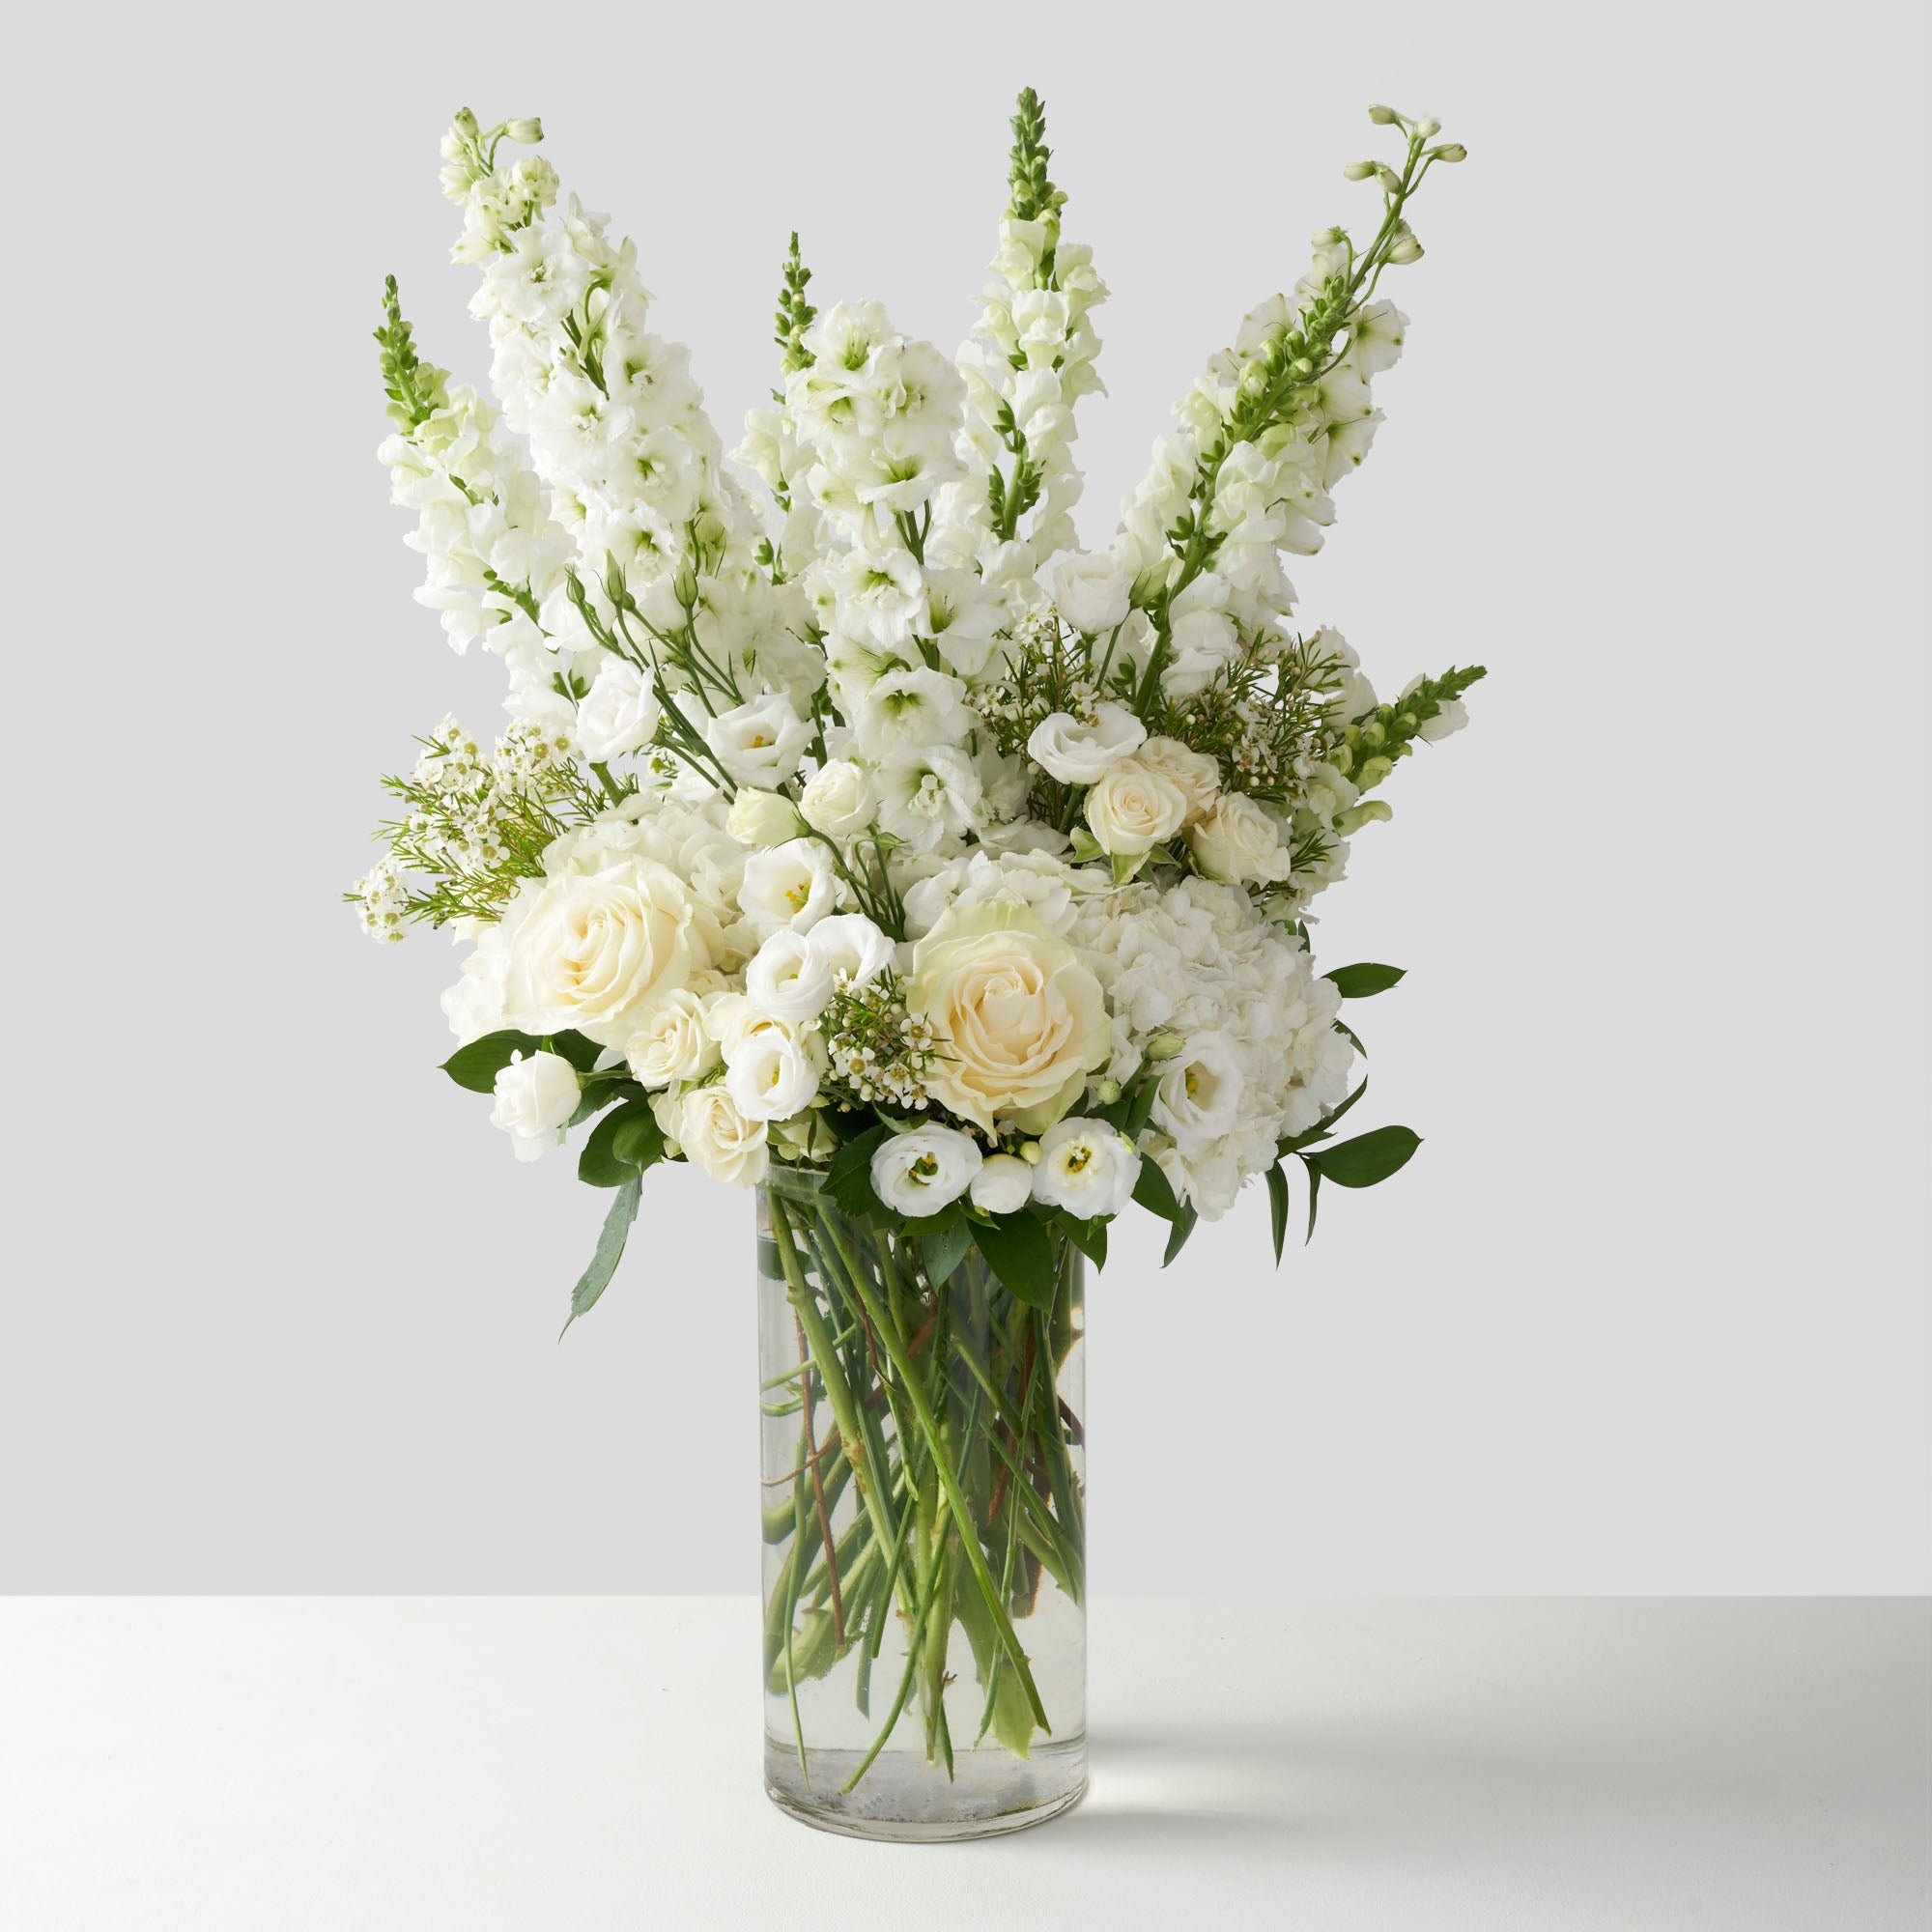 An all white flower arrangement composed of delphinium, roses, lisanthus, wax flower, and hydrangea.